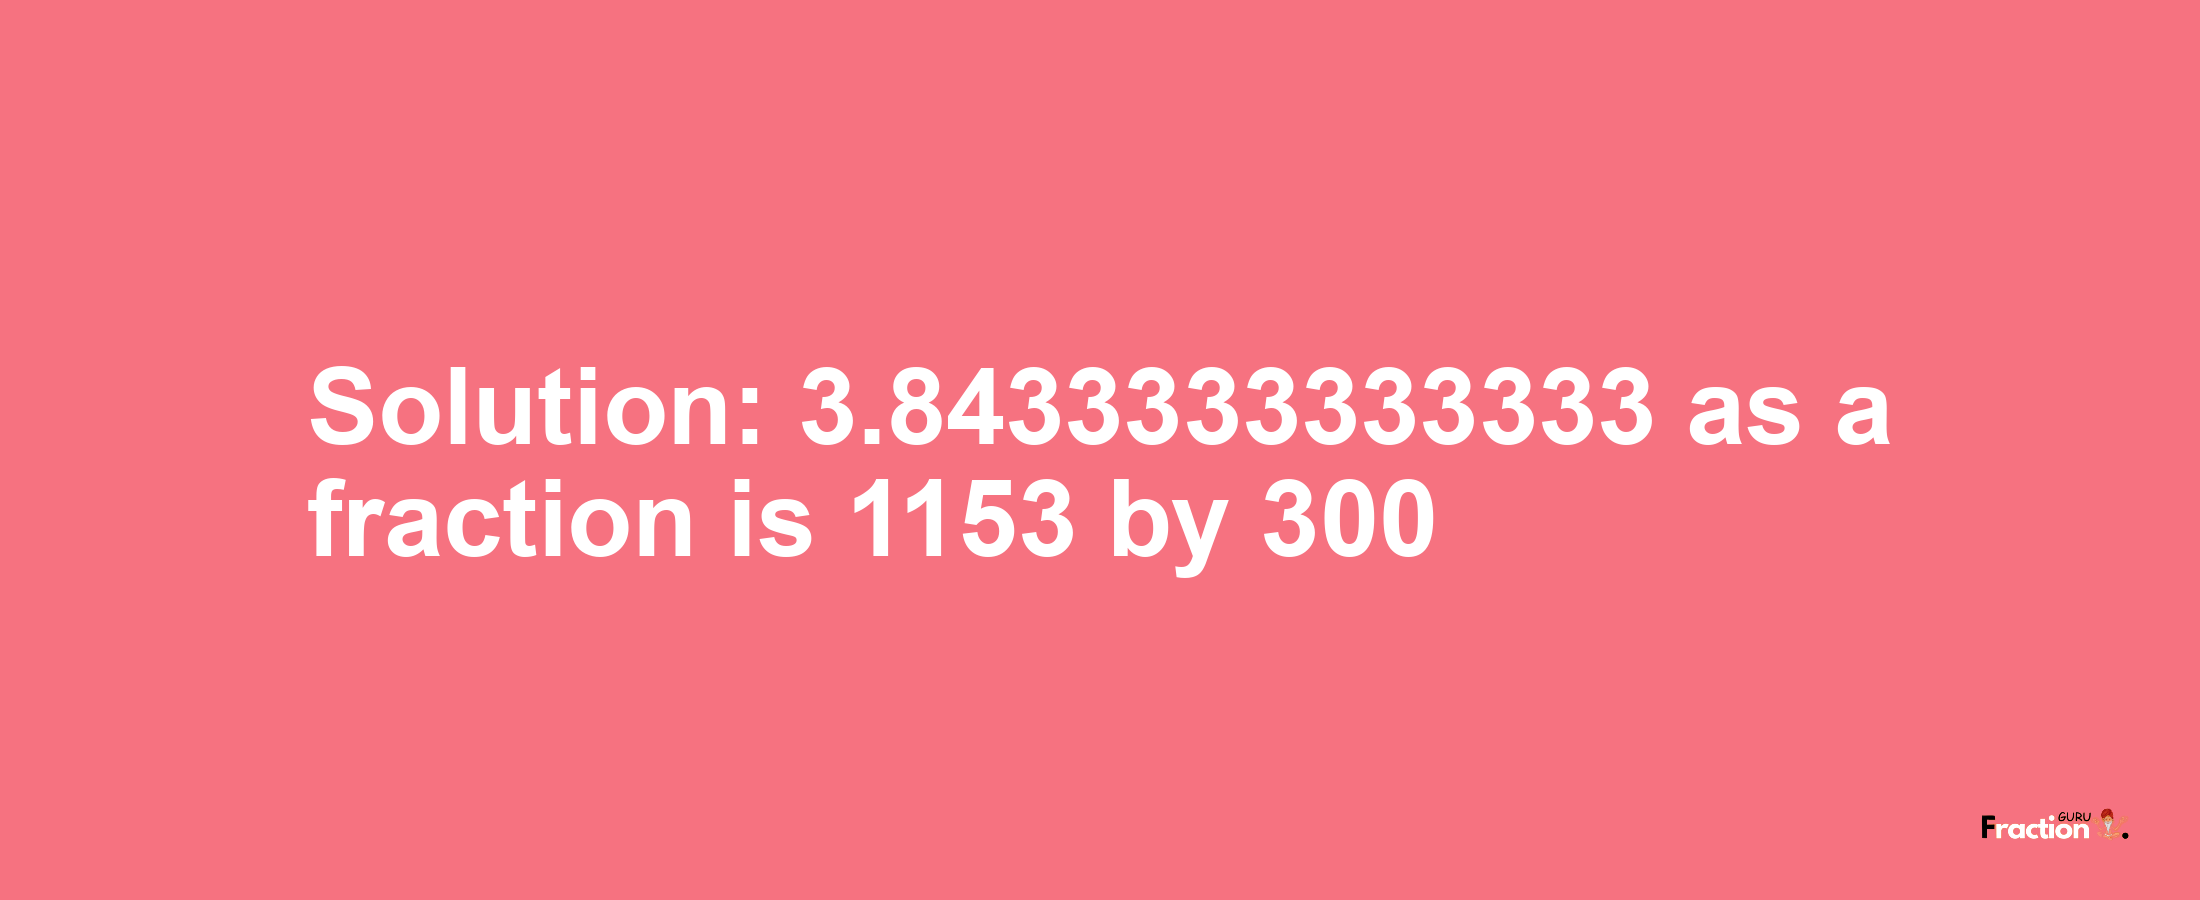 Solution:3.8433333333333 as a fraction is 1153/300